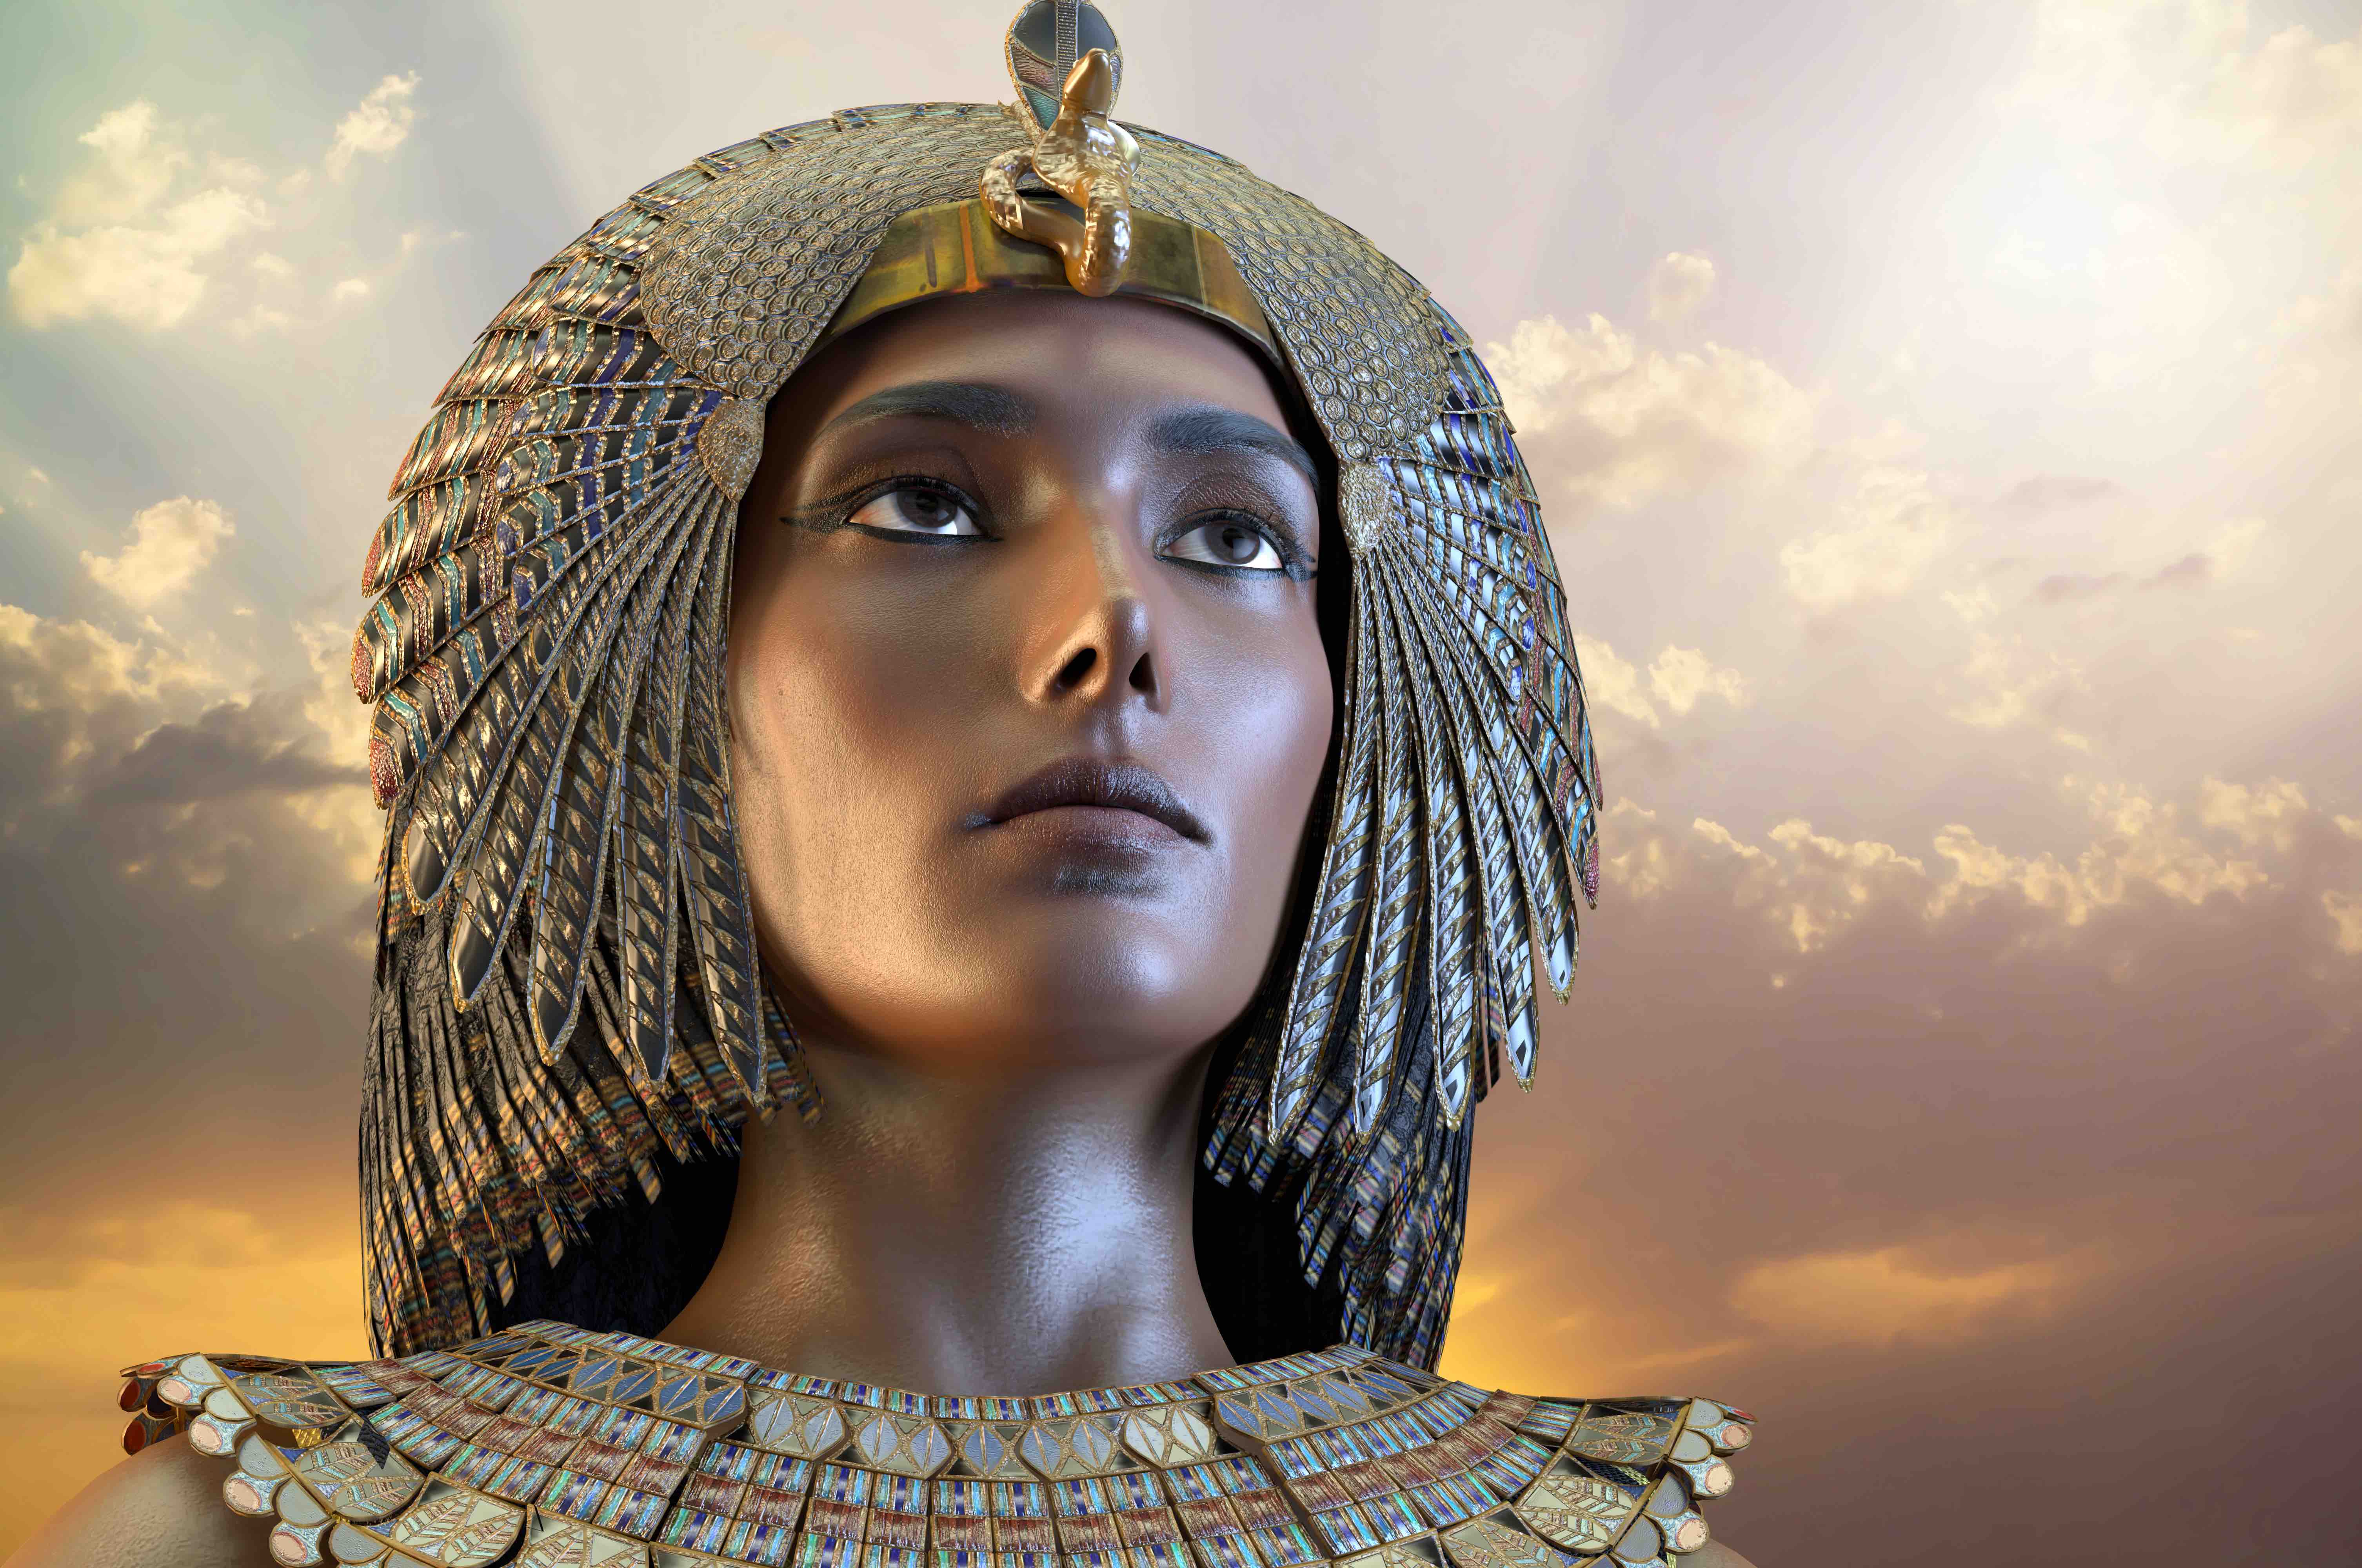 pharaoh cleopatra game can you kill off all game meat